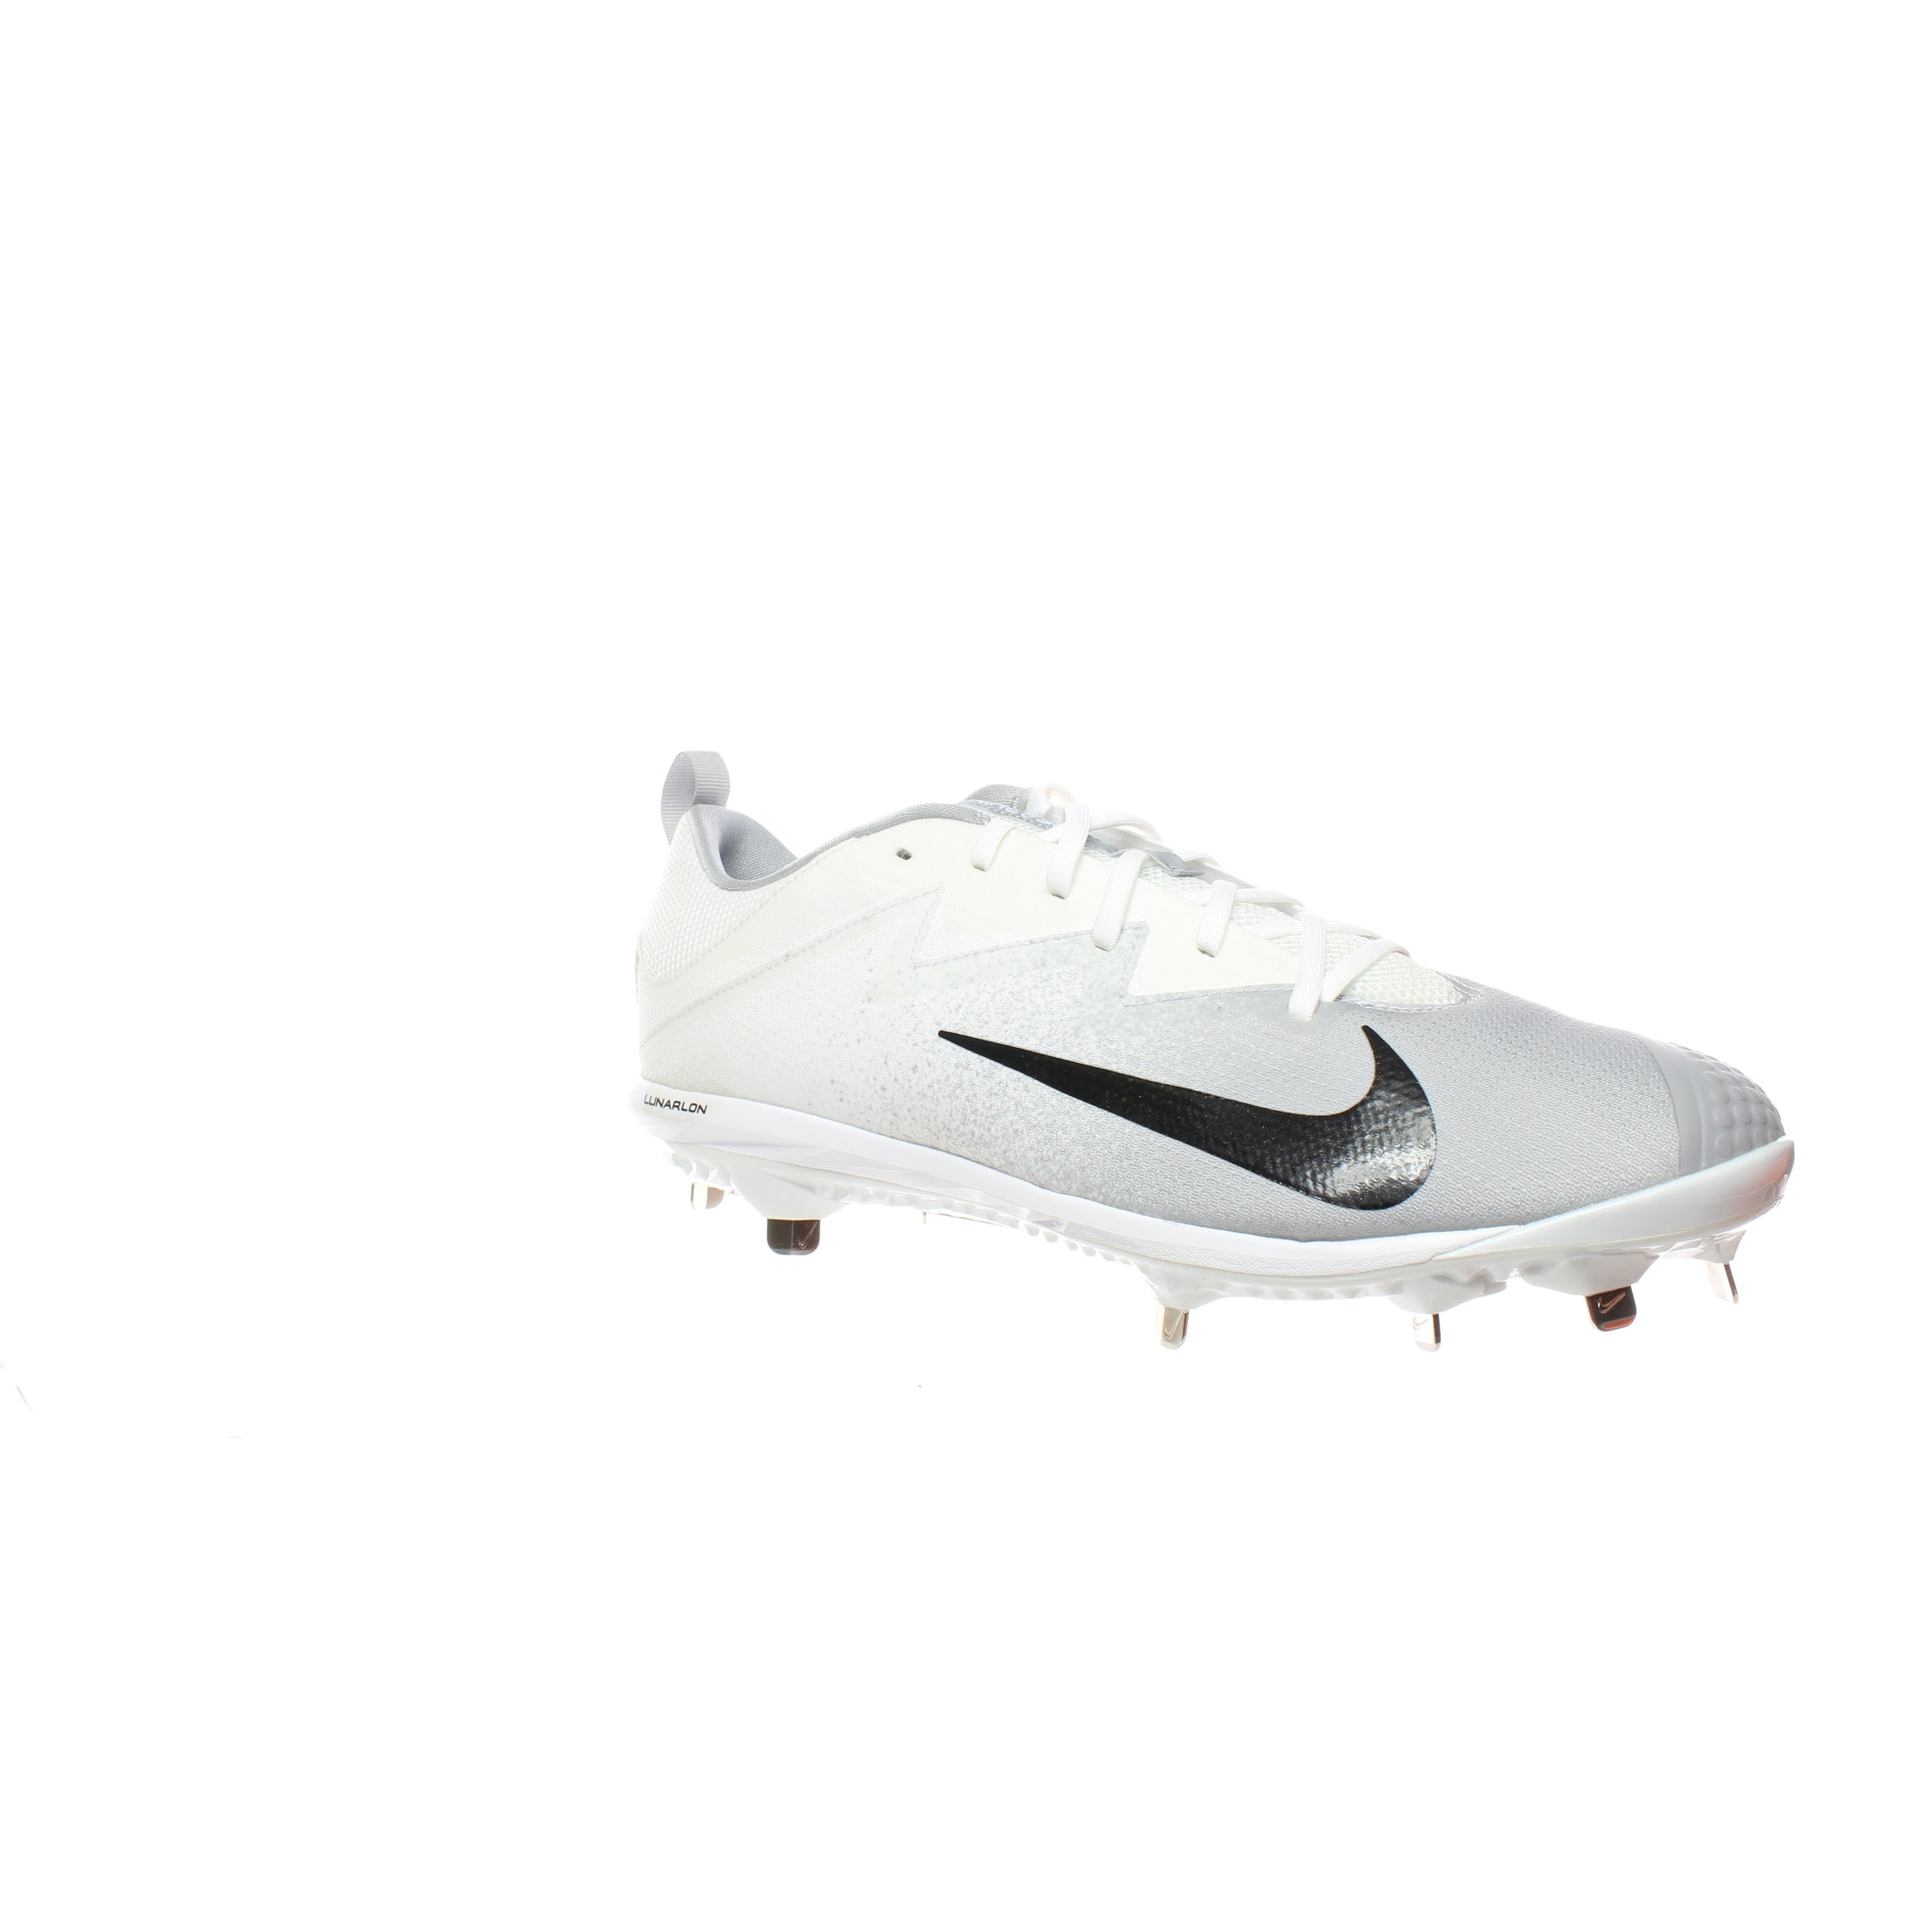 nike soccer cleats size 14